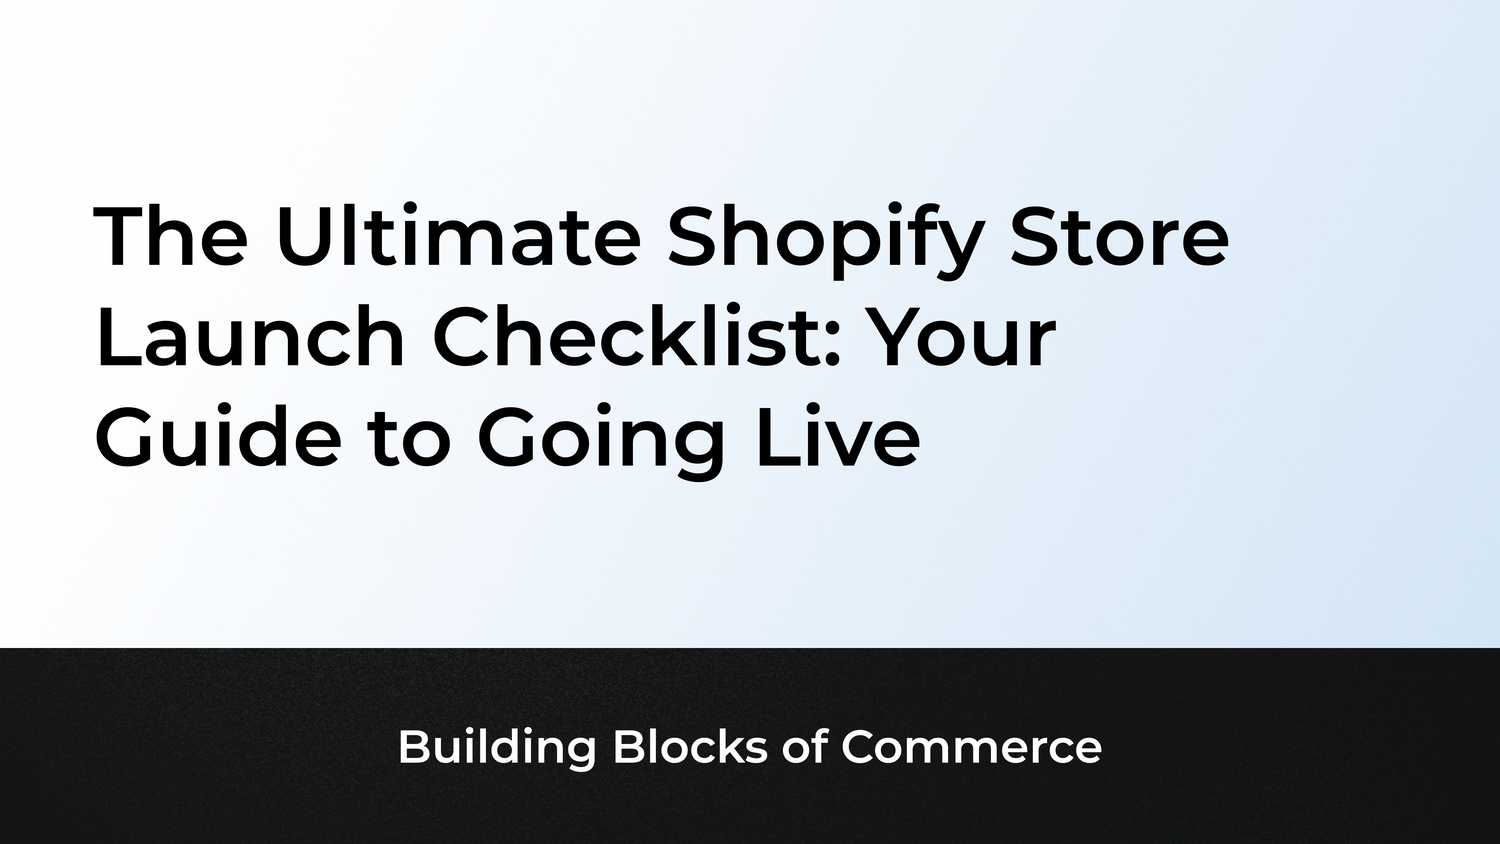 The Ultimate Shopify Store Launch Checklist: Your Guide to Going Live